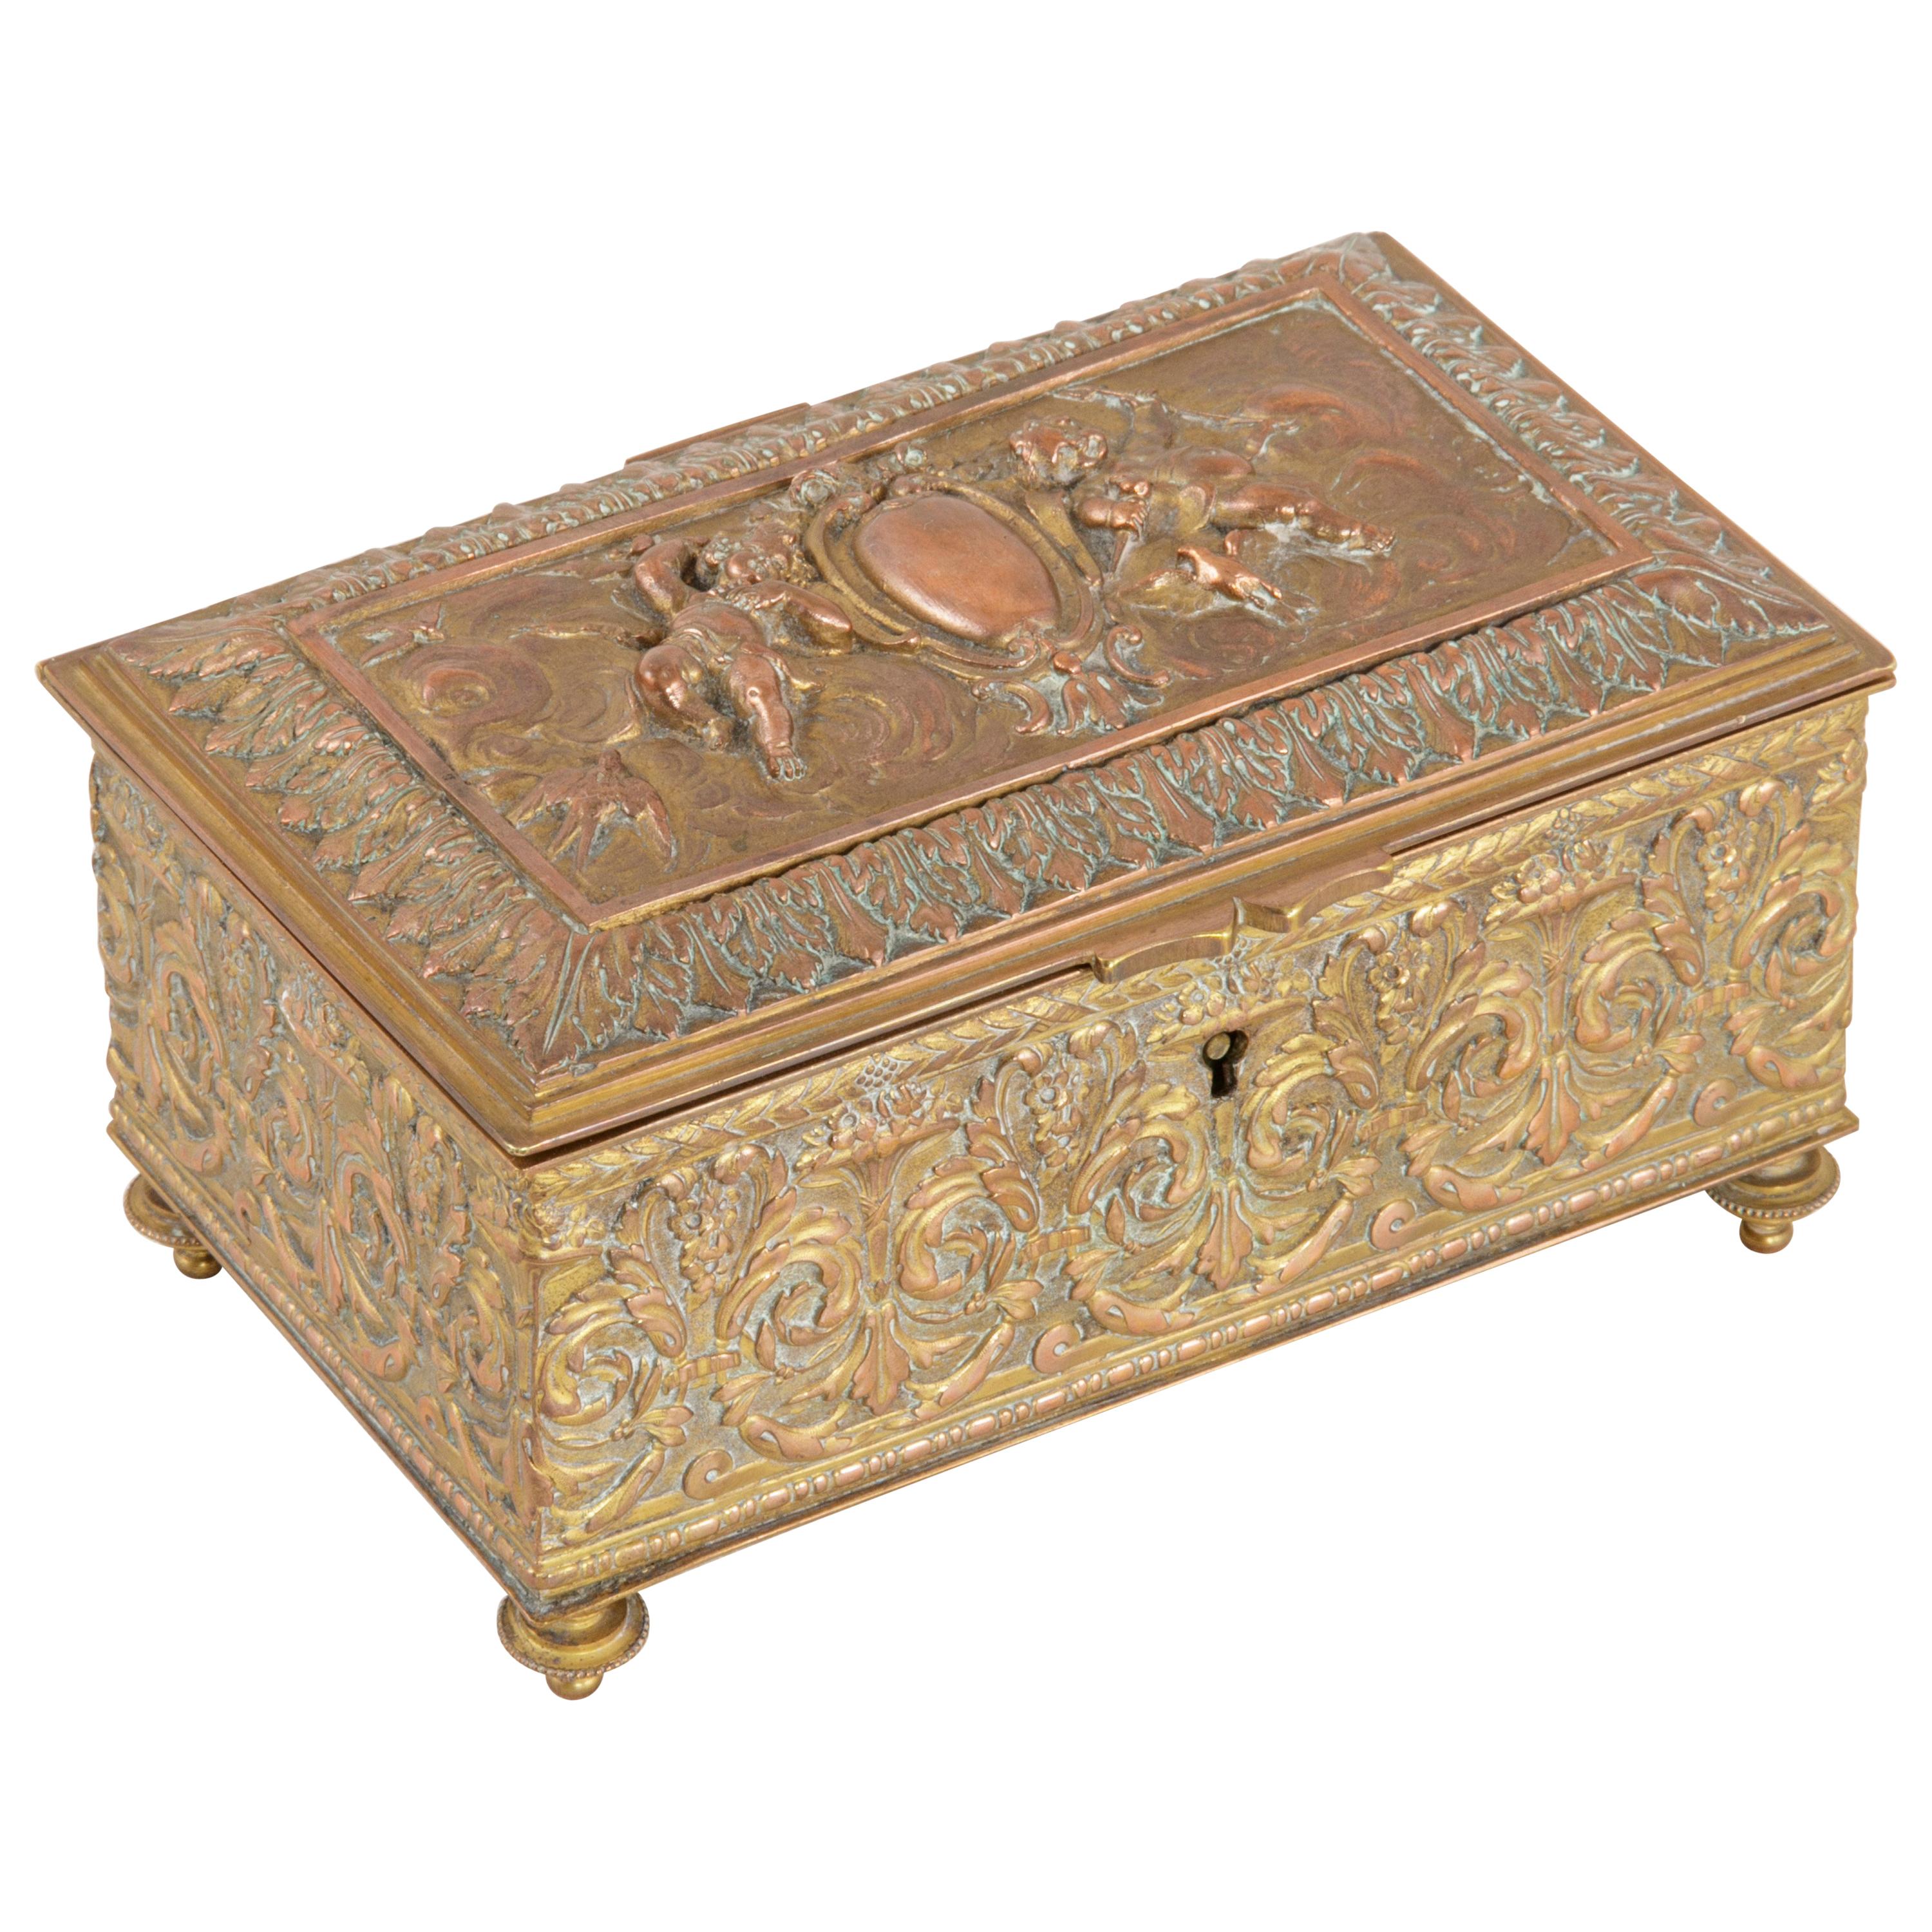 French Copper Repousse Box with Lid, Cherubs and Floral Motif, circa 1900